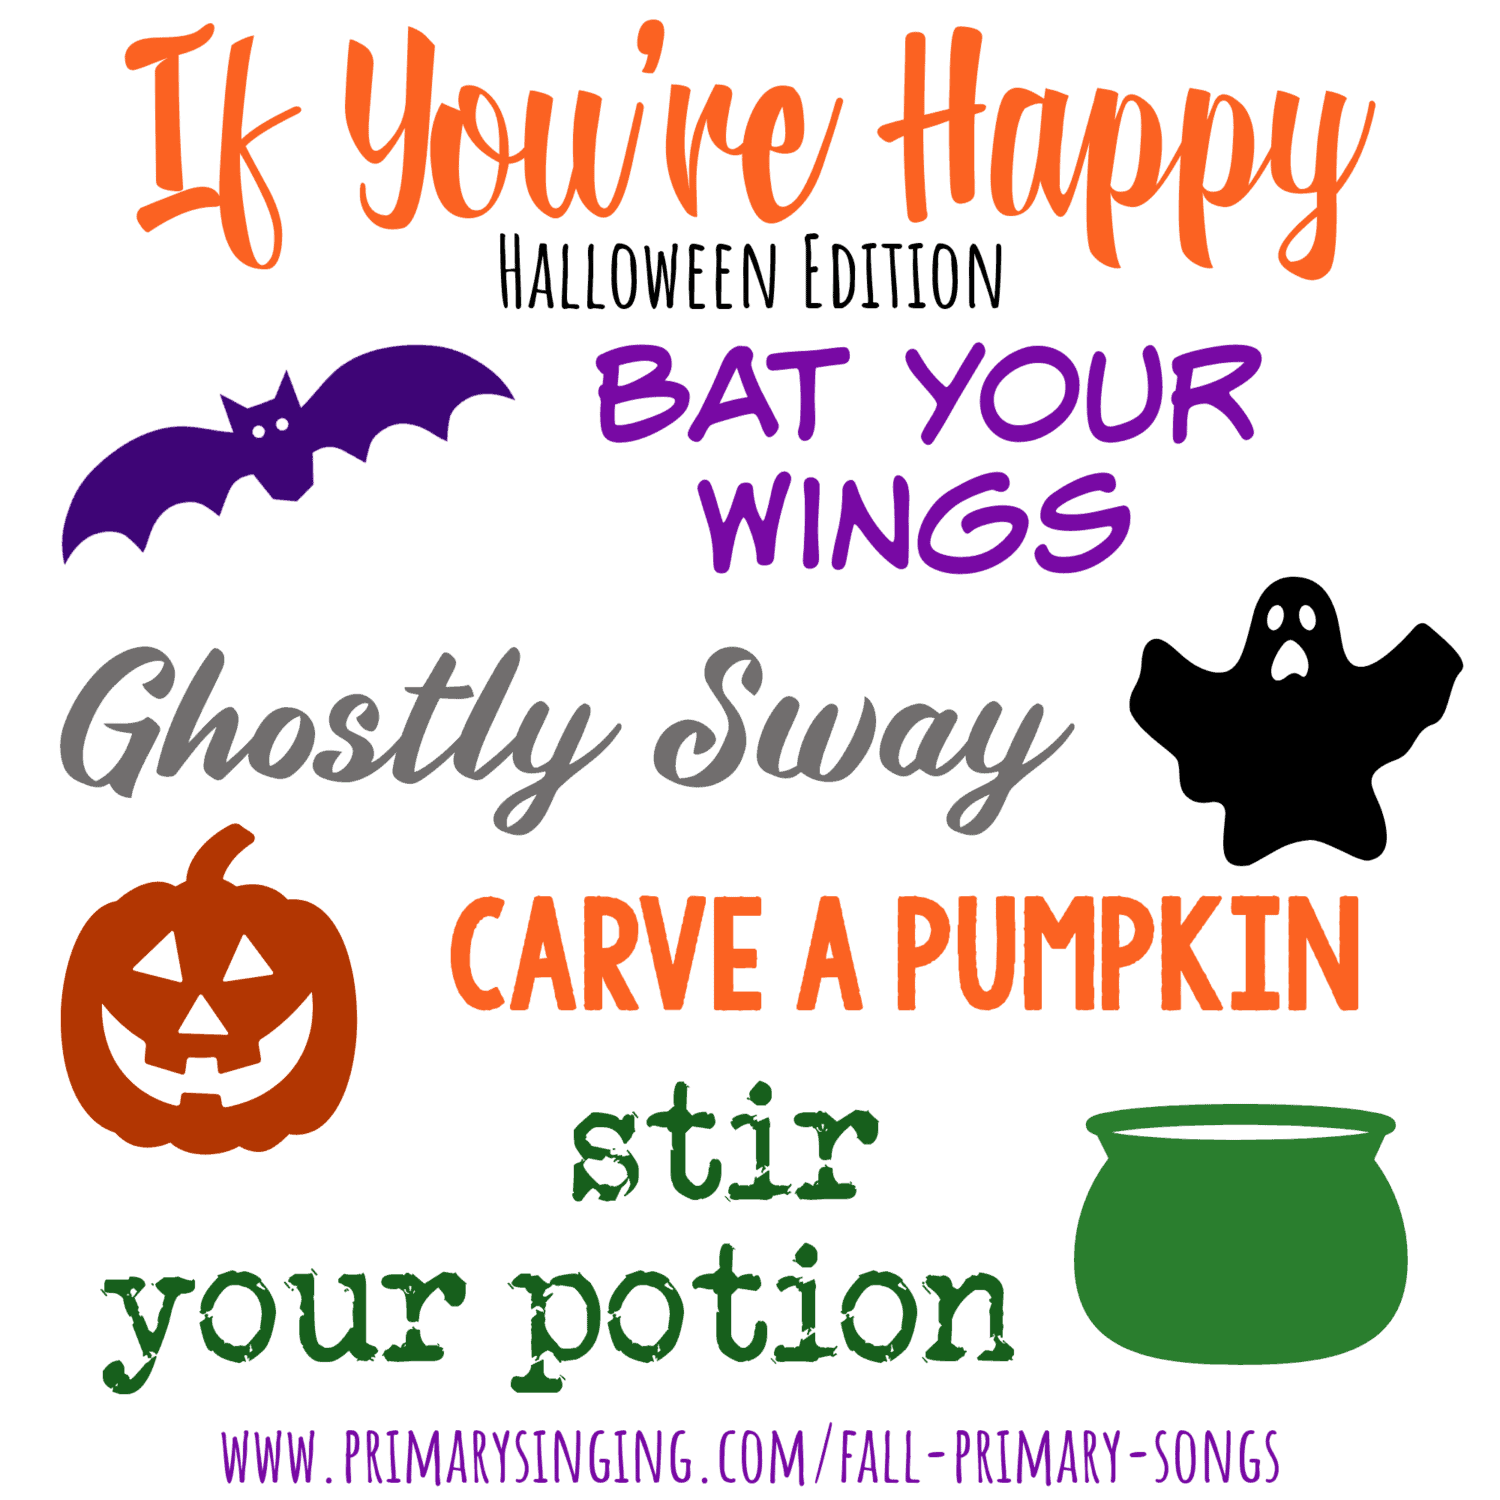 If You're Happy and You Know It - Fun Halloween Edition to swap out the lyrics for perfectly spooky alternatives for LDS Primary Music Leaders singing time activities!